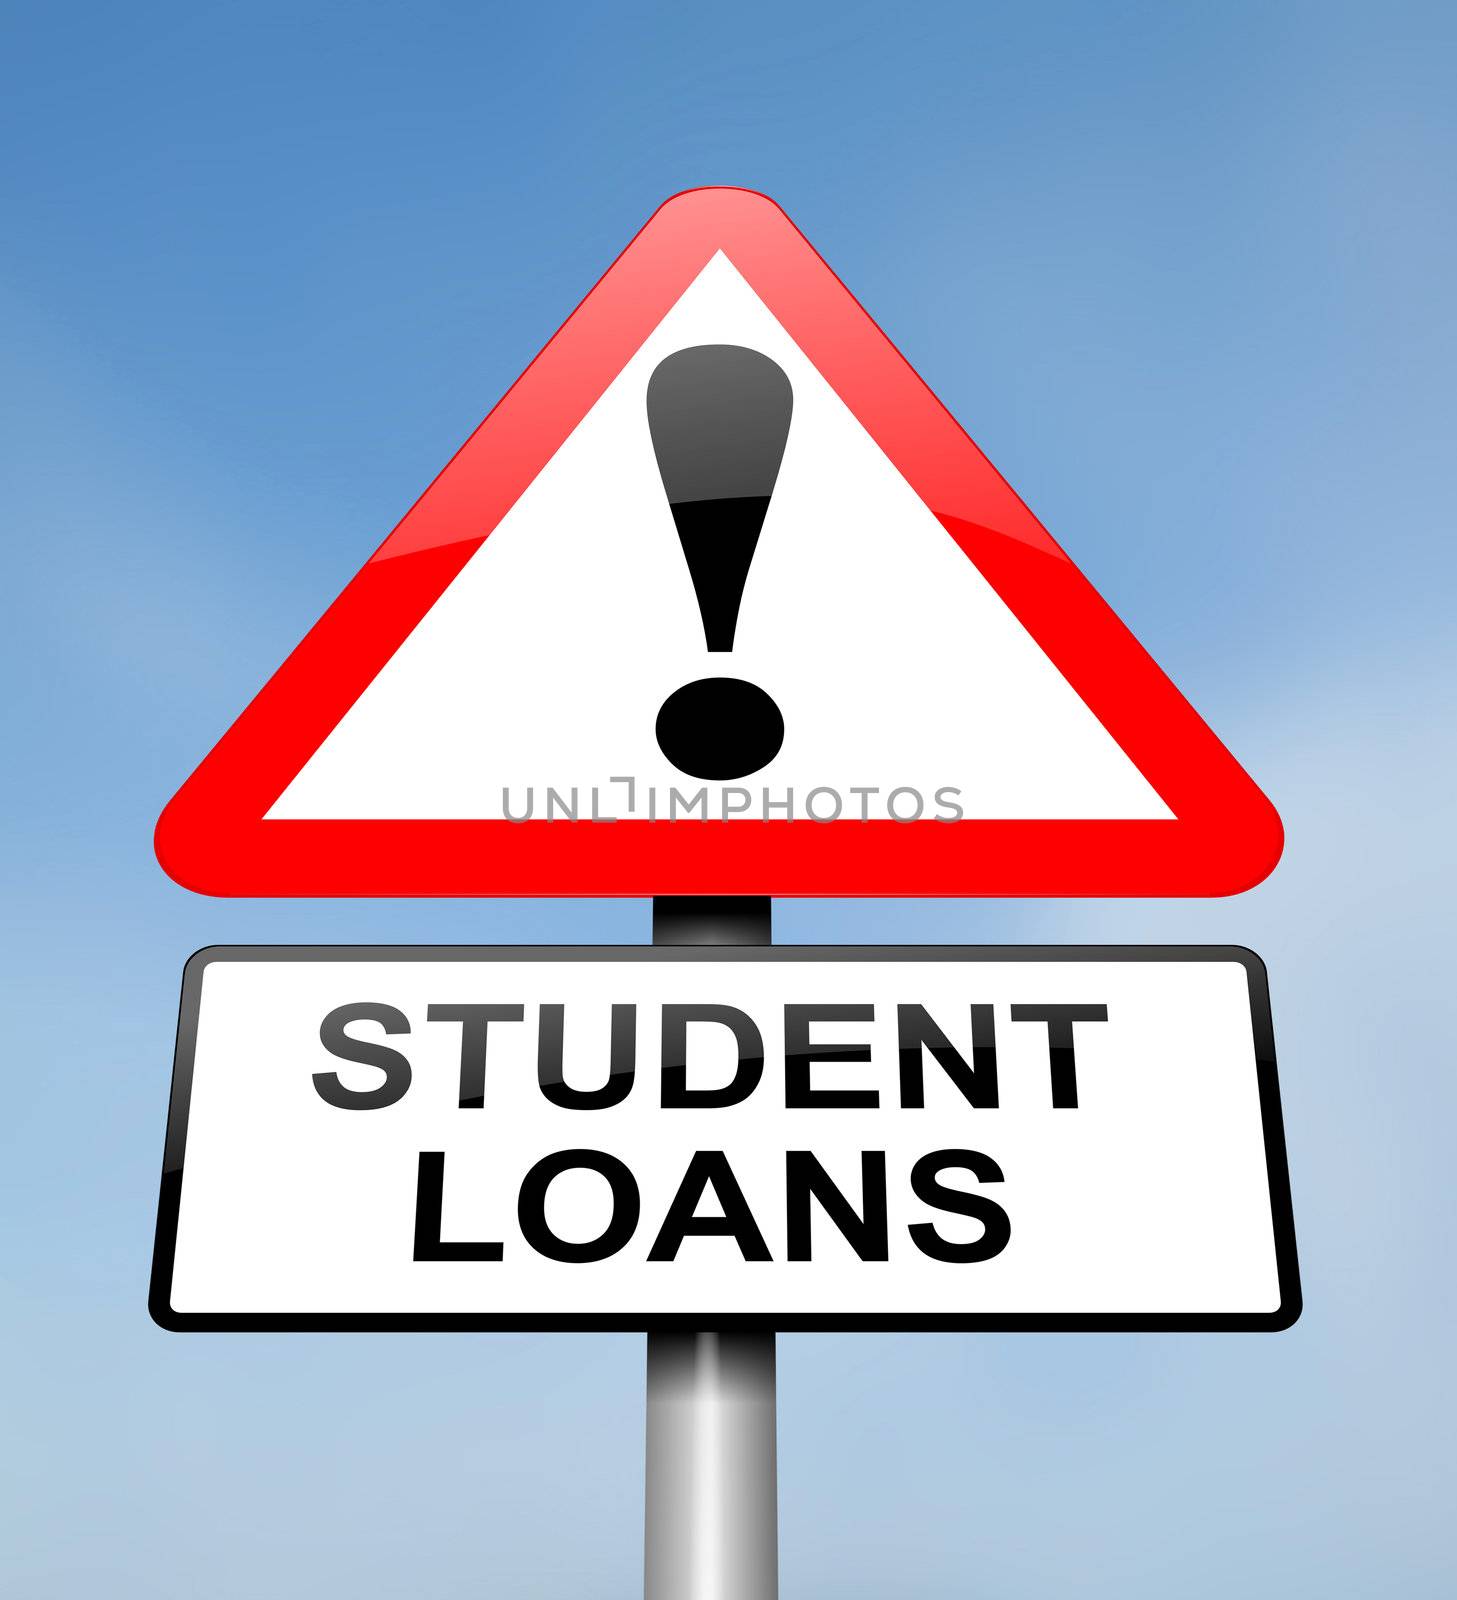 Illustration depicting a red and white triangular warning sign with a student loans concept. Blurred sky background.